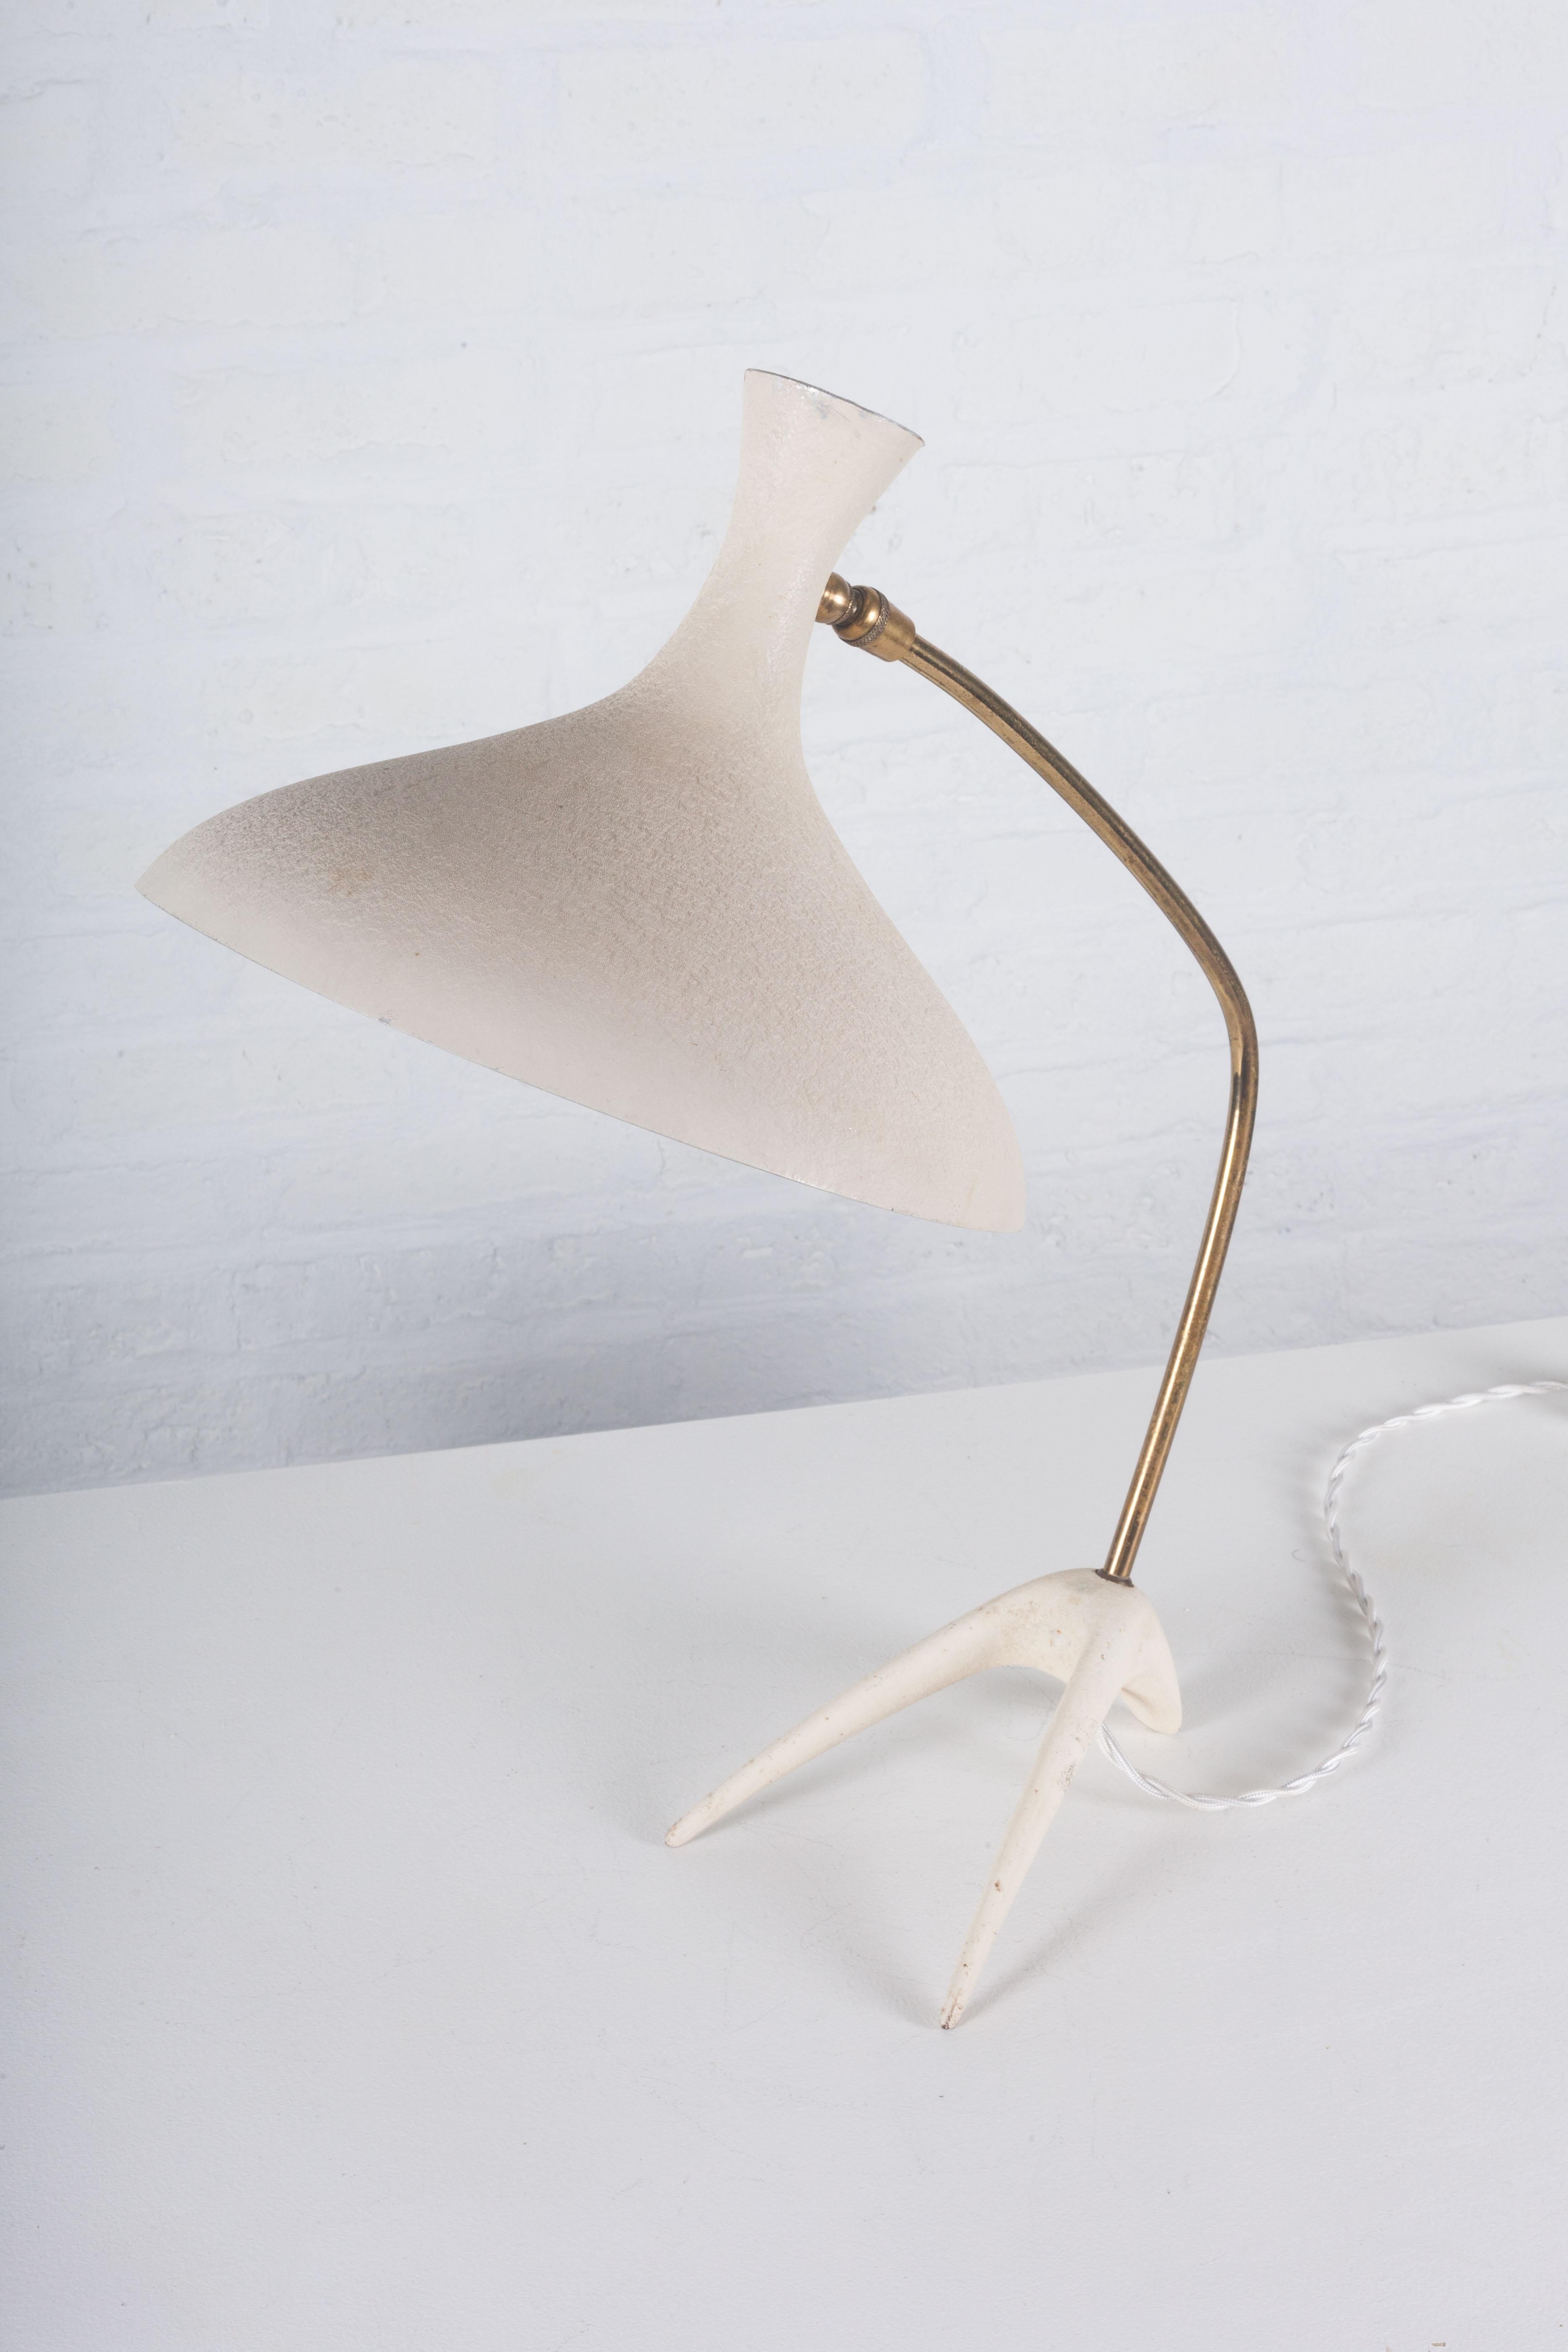 Table Lamp by Cosack Leuchten, White, Germany, 1950s For Sale 6